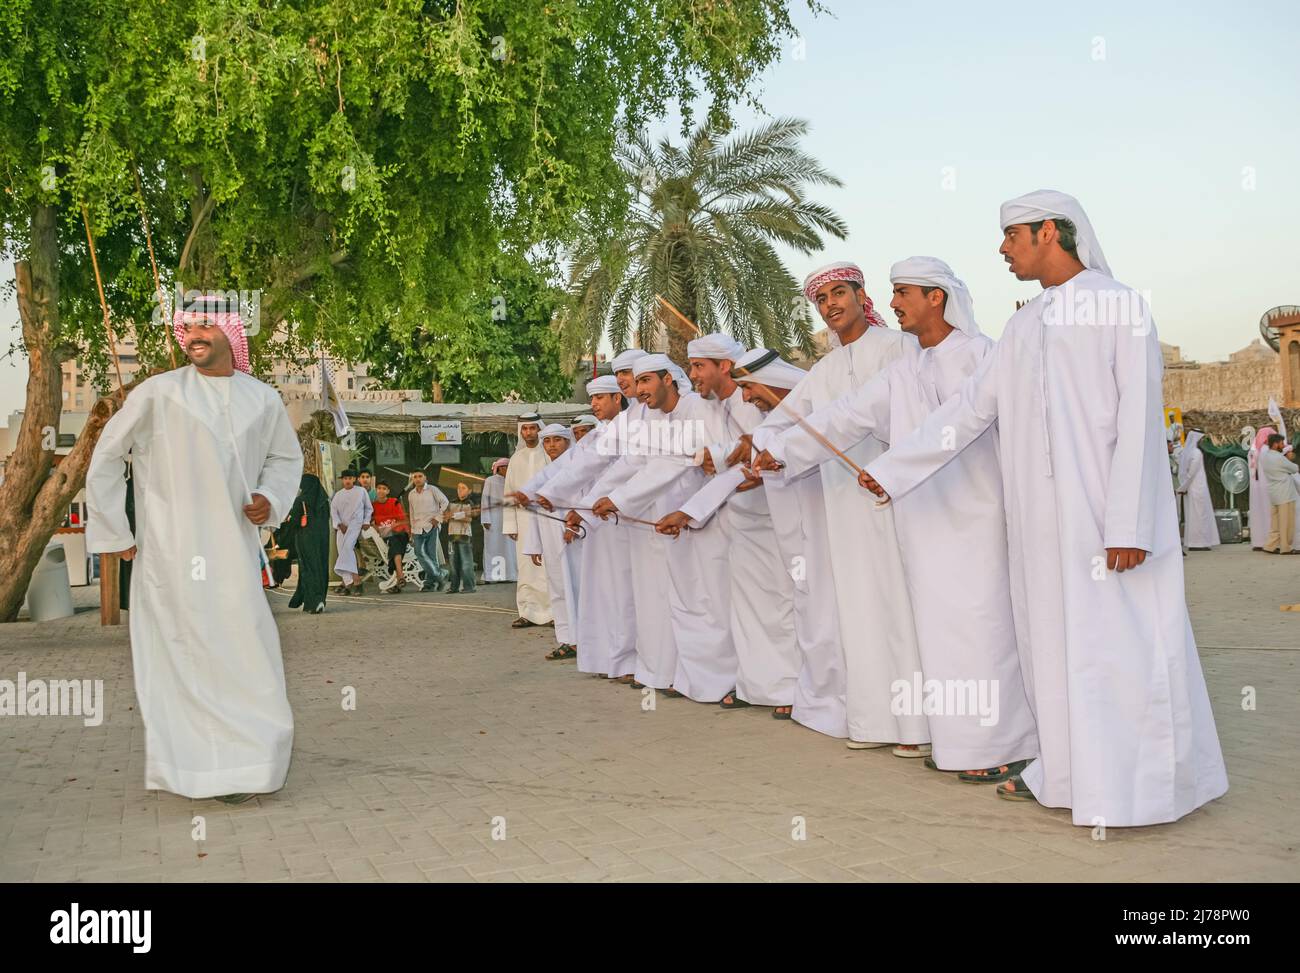 A group of Arab men performing the ayyalah, or stick dance, during Sharjah's Heritage Days Festival. Stock Photo